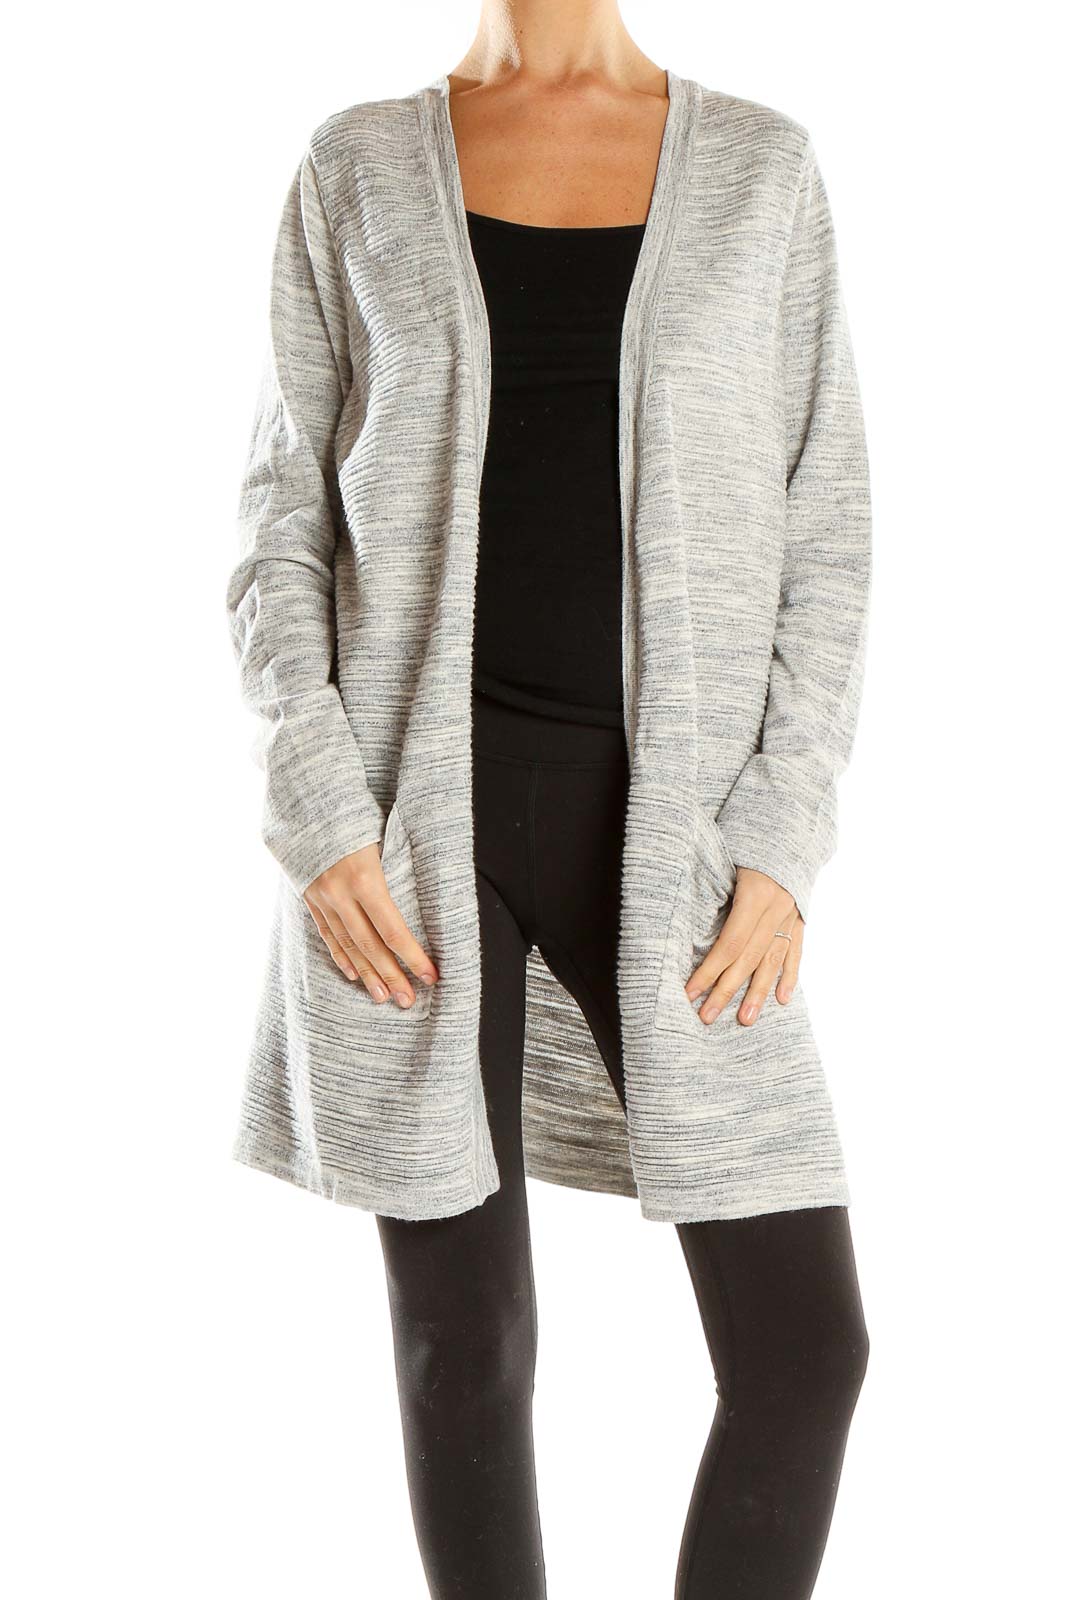 Gray Textured Cardigan Front